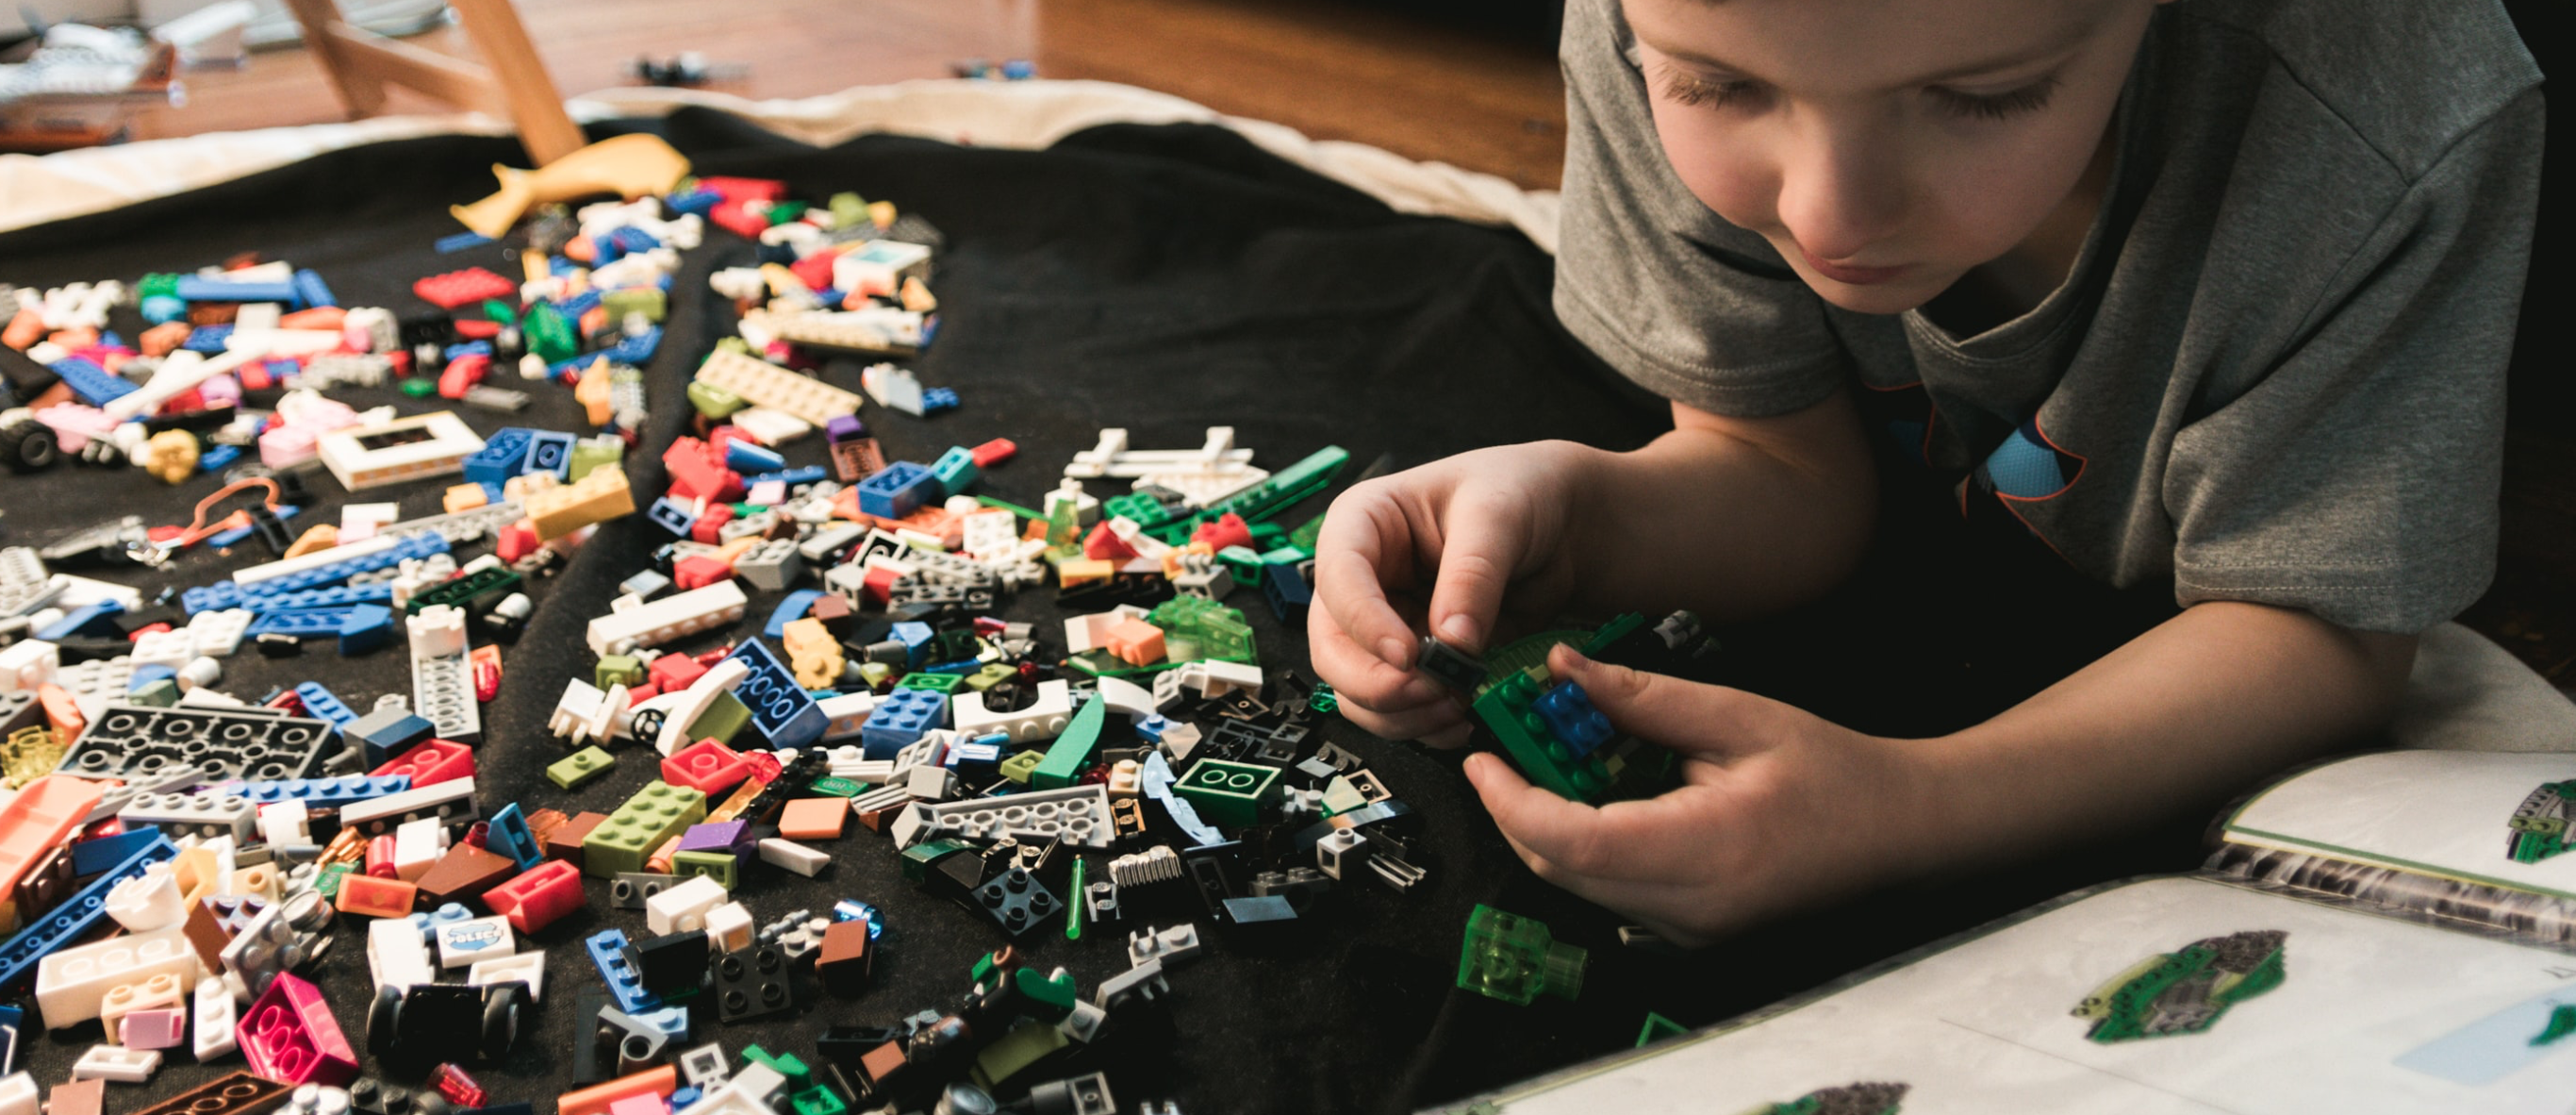 Child playing on the floor with numerous LEGO bricks